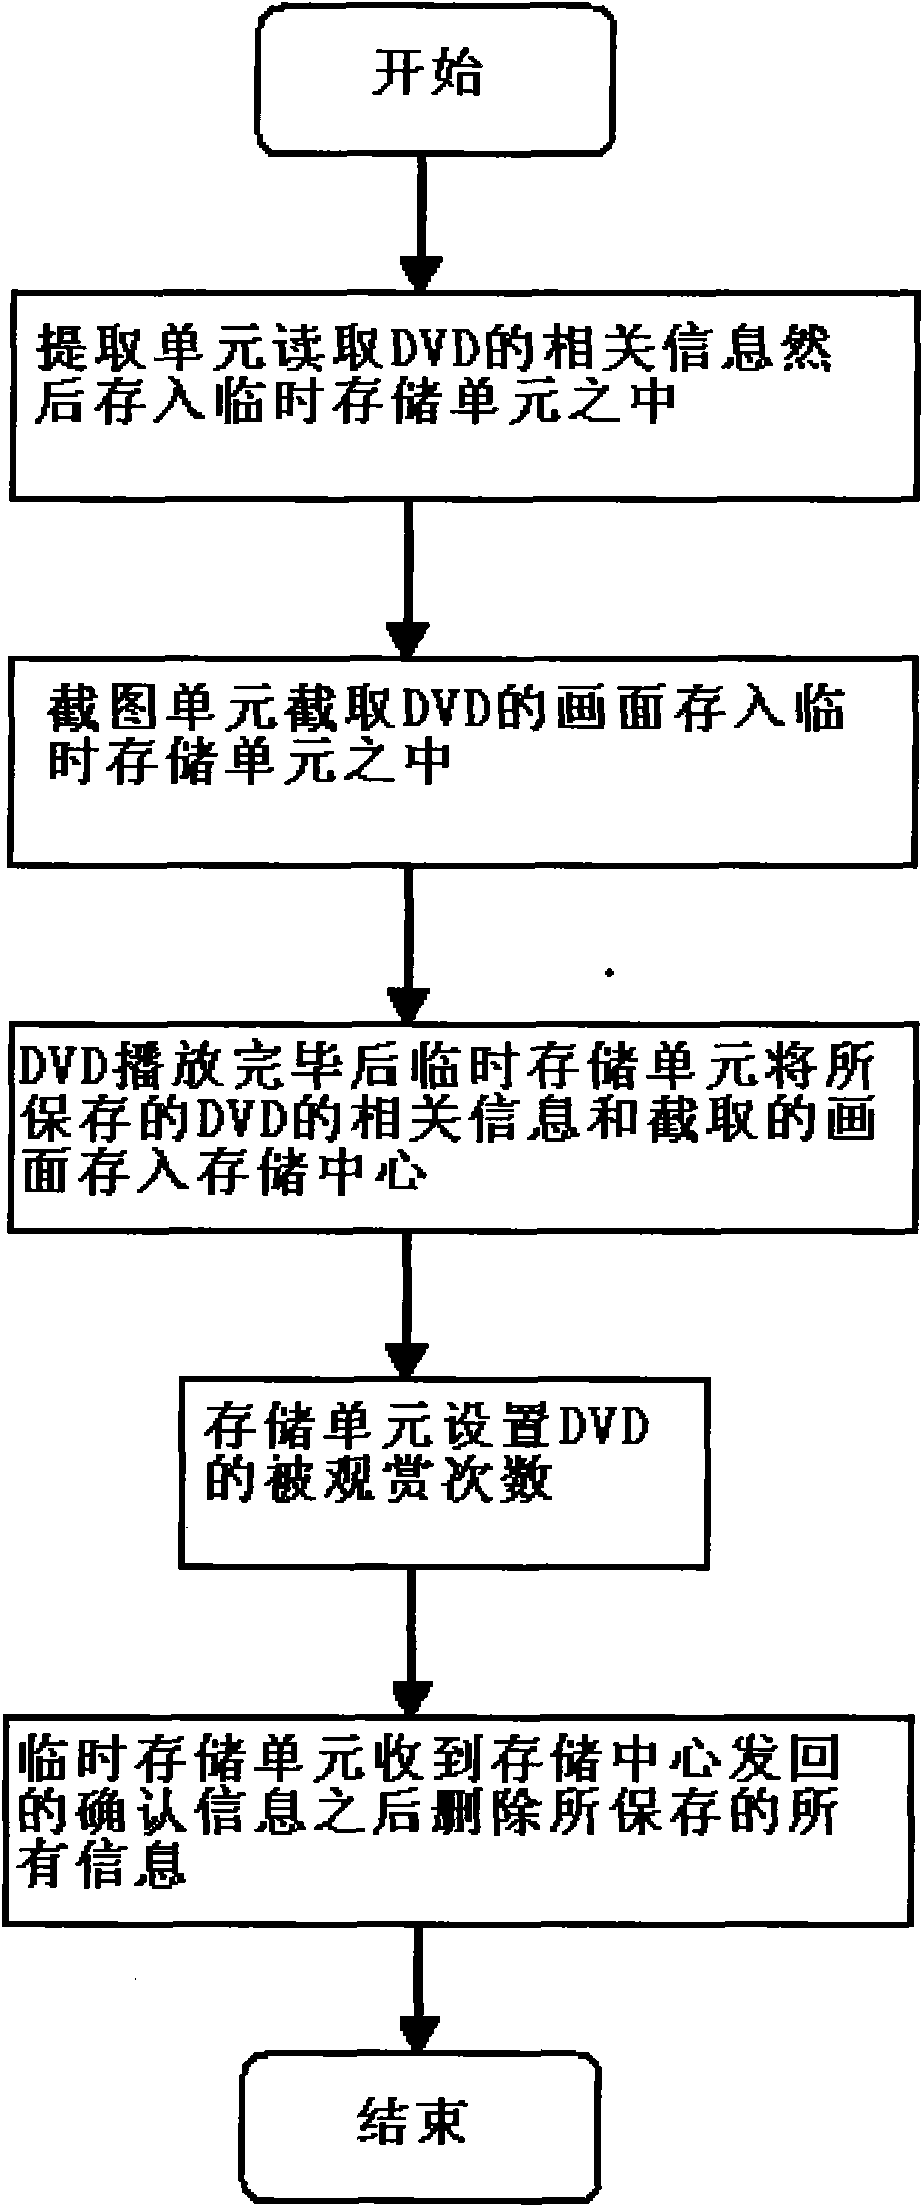 Portable DVD system and portable DVD method for saving watching record of user